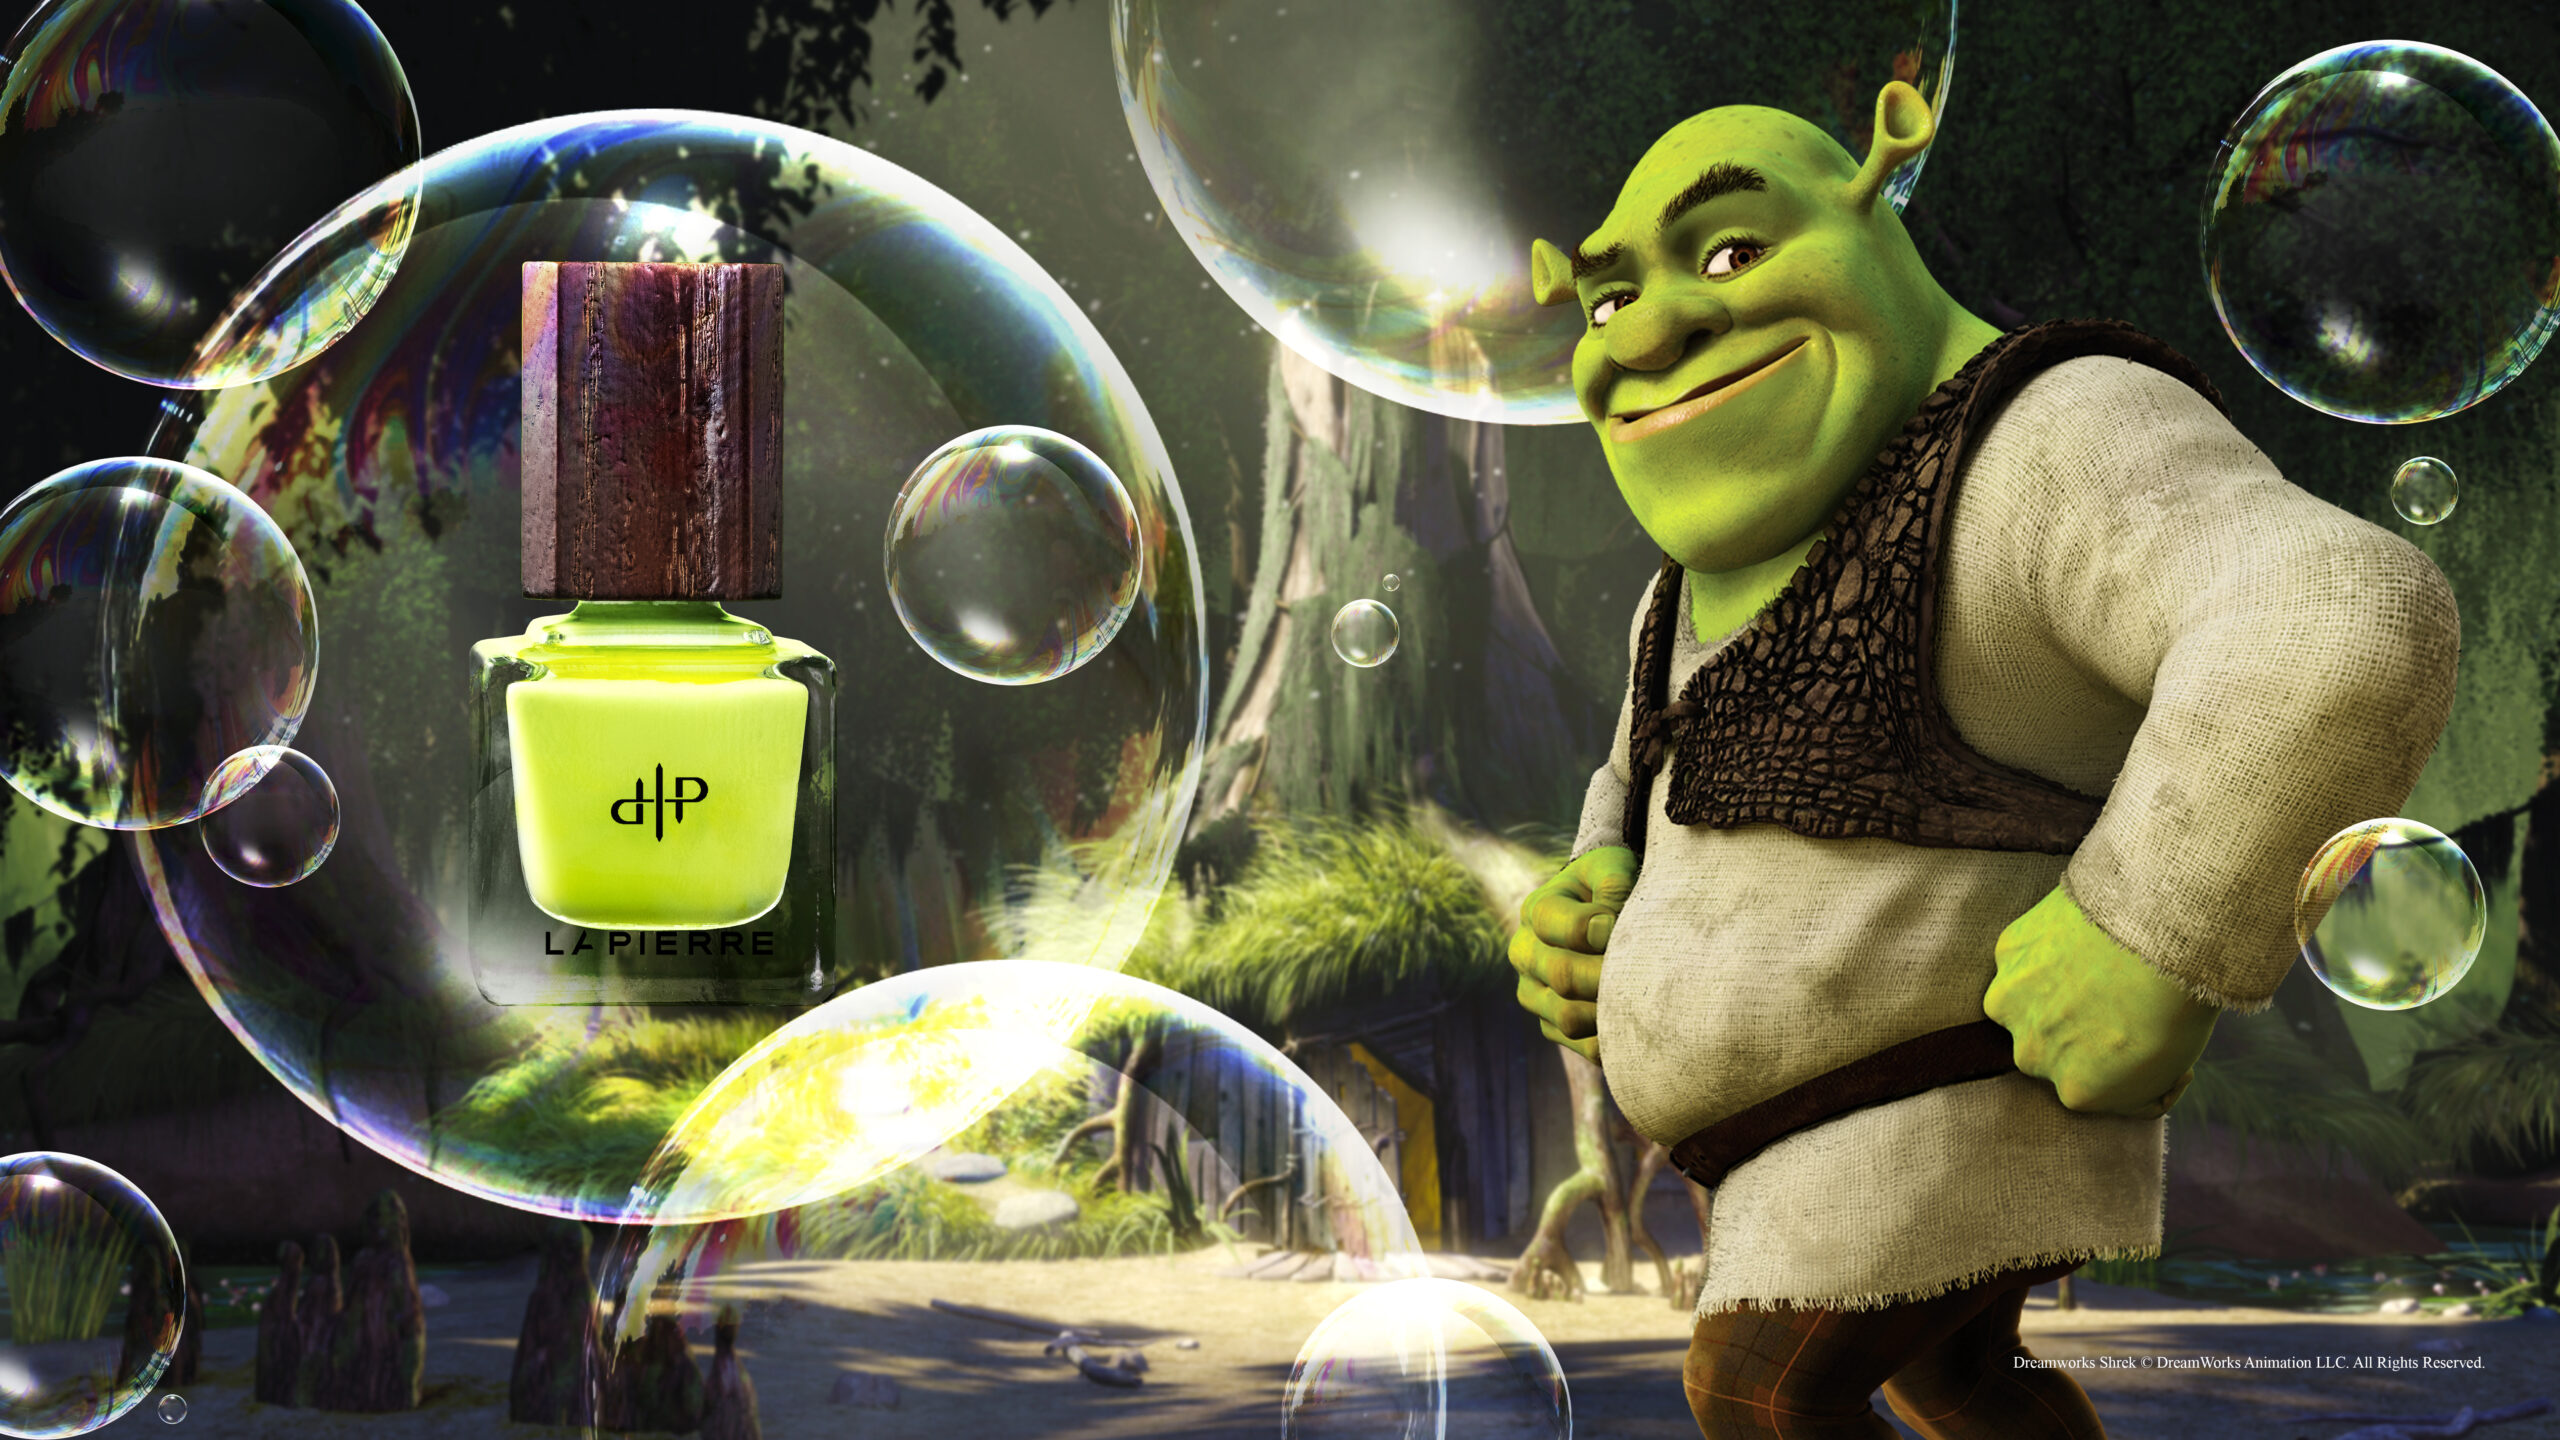 La Pierre Cosmetics Teams Up With Dreamworks Pictures For ‘Shrek-ish’ Collection